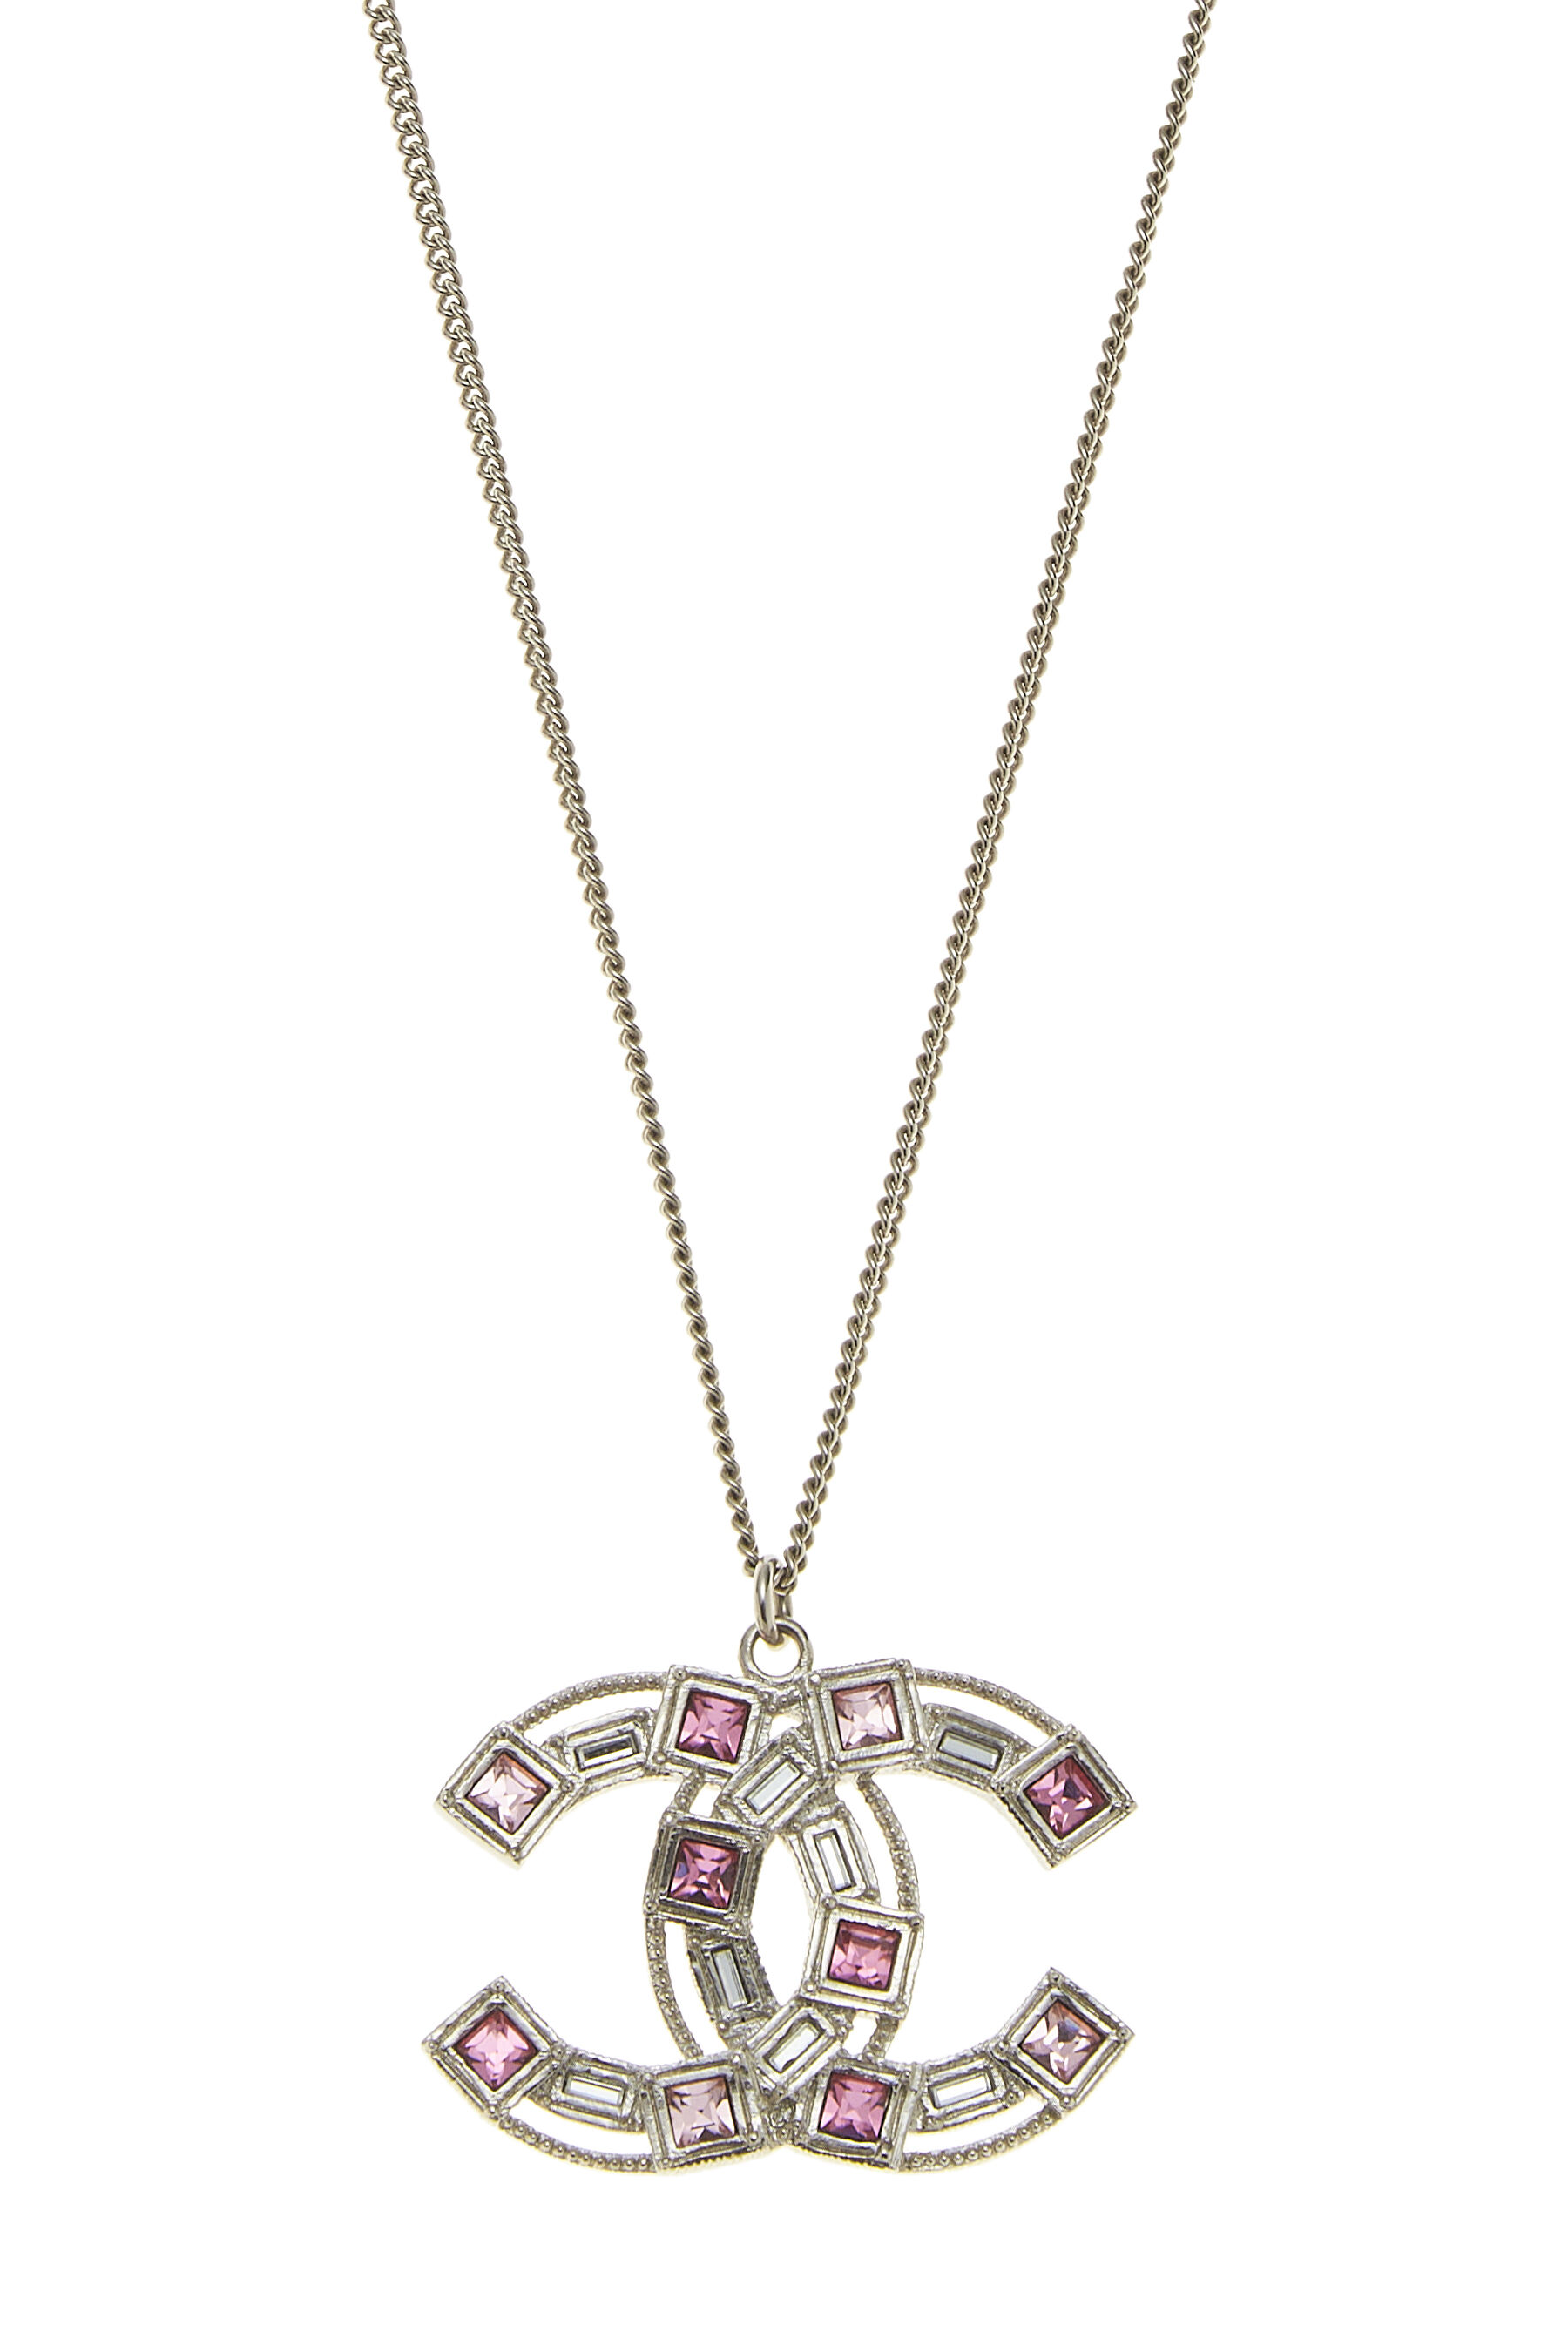 Chanel Silver & Pink Crystal 'CC' Necklace Q6J13X2OPB002